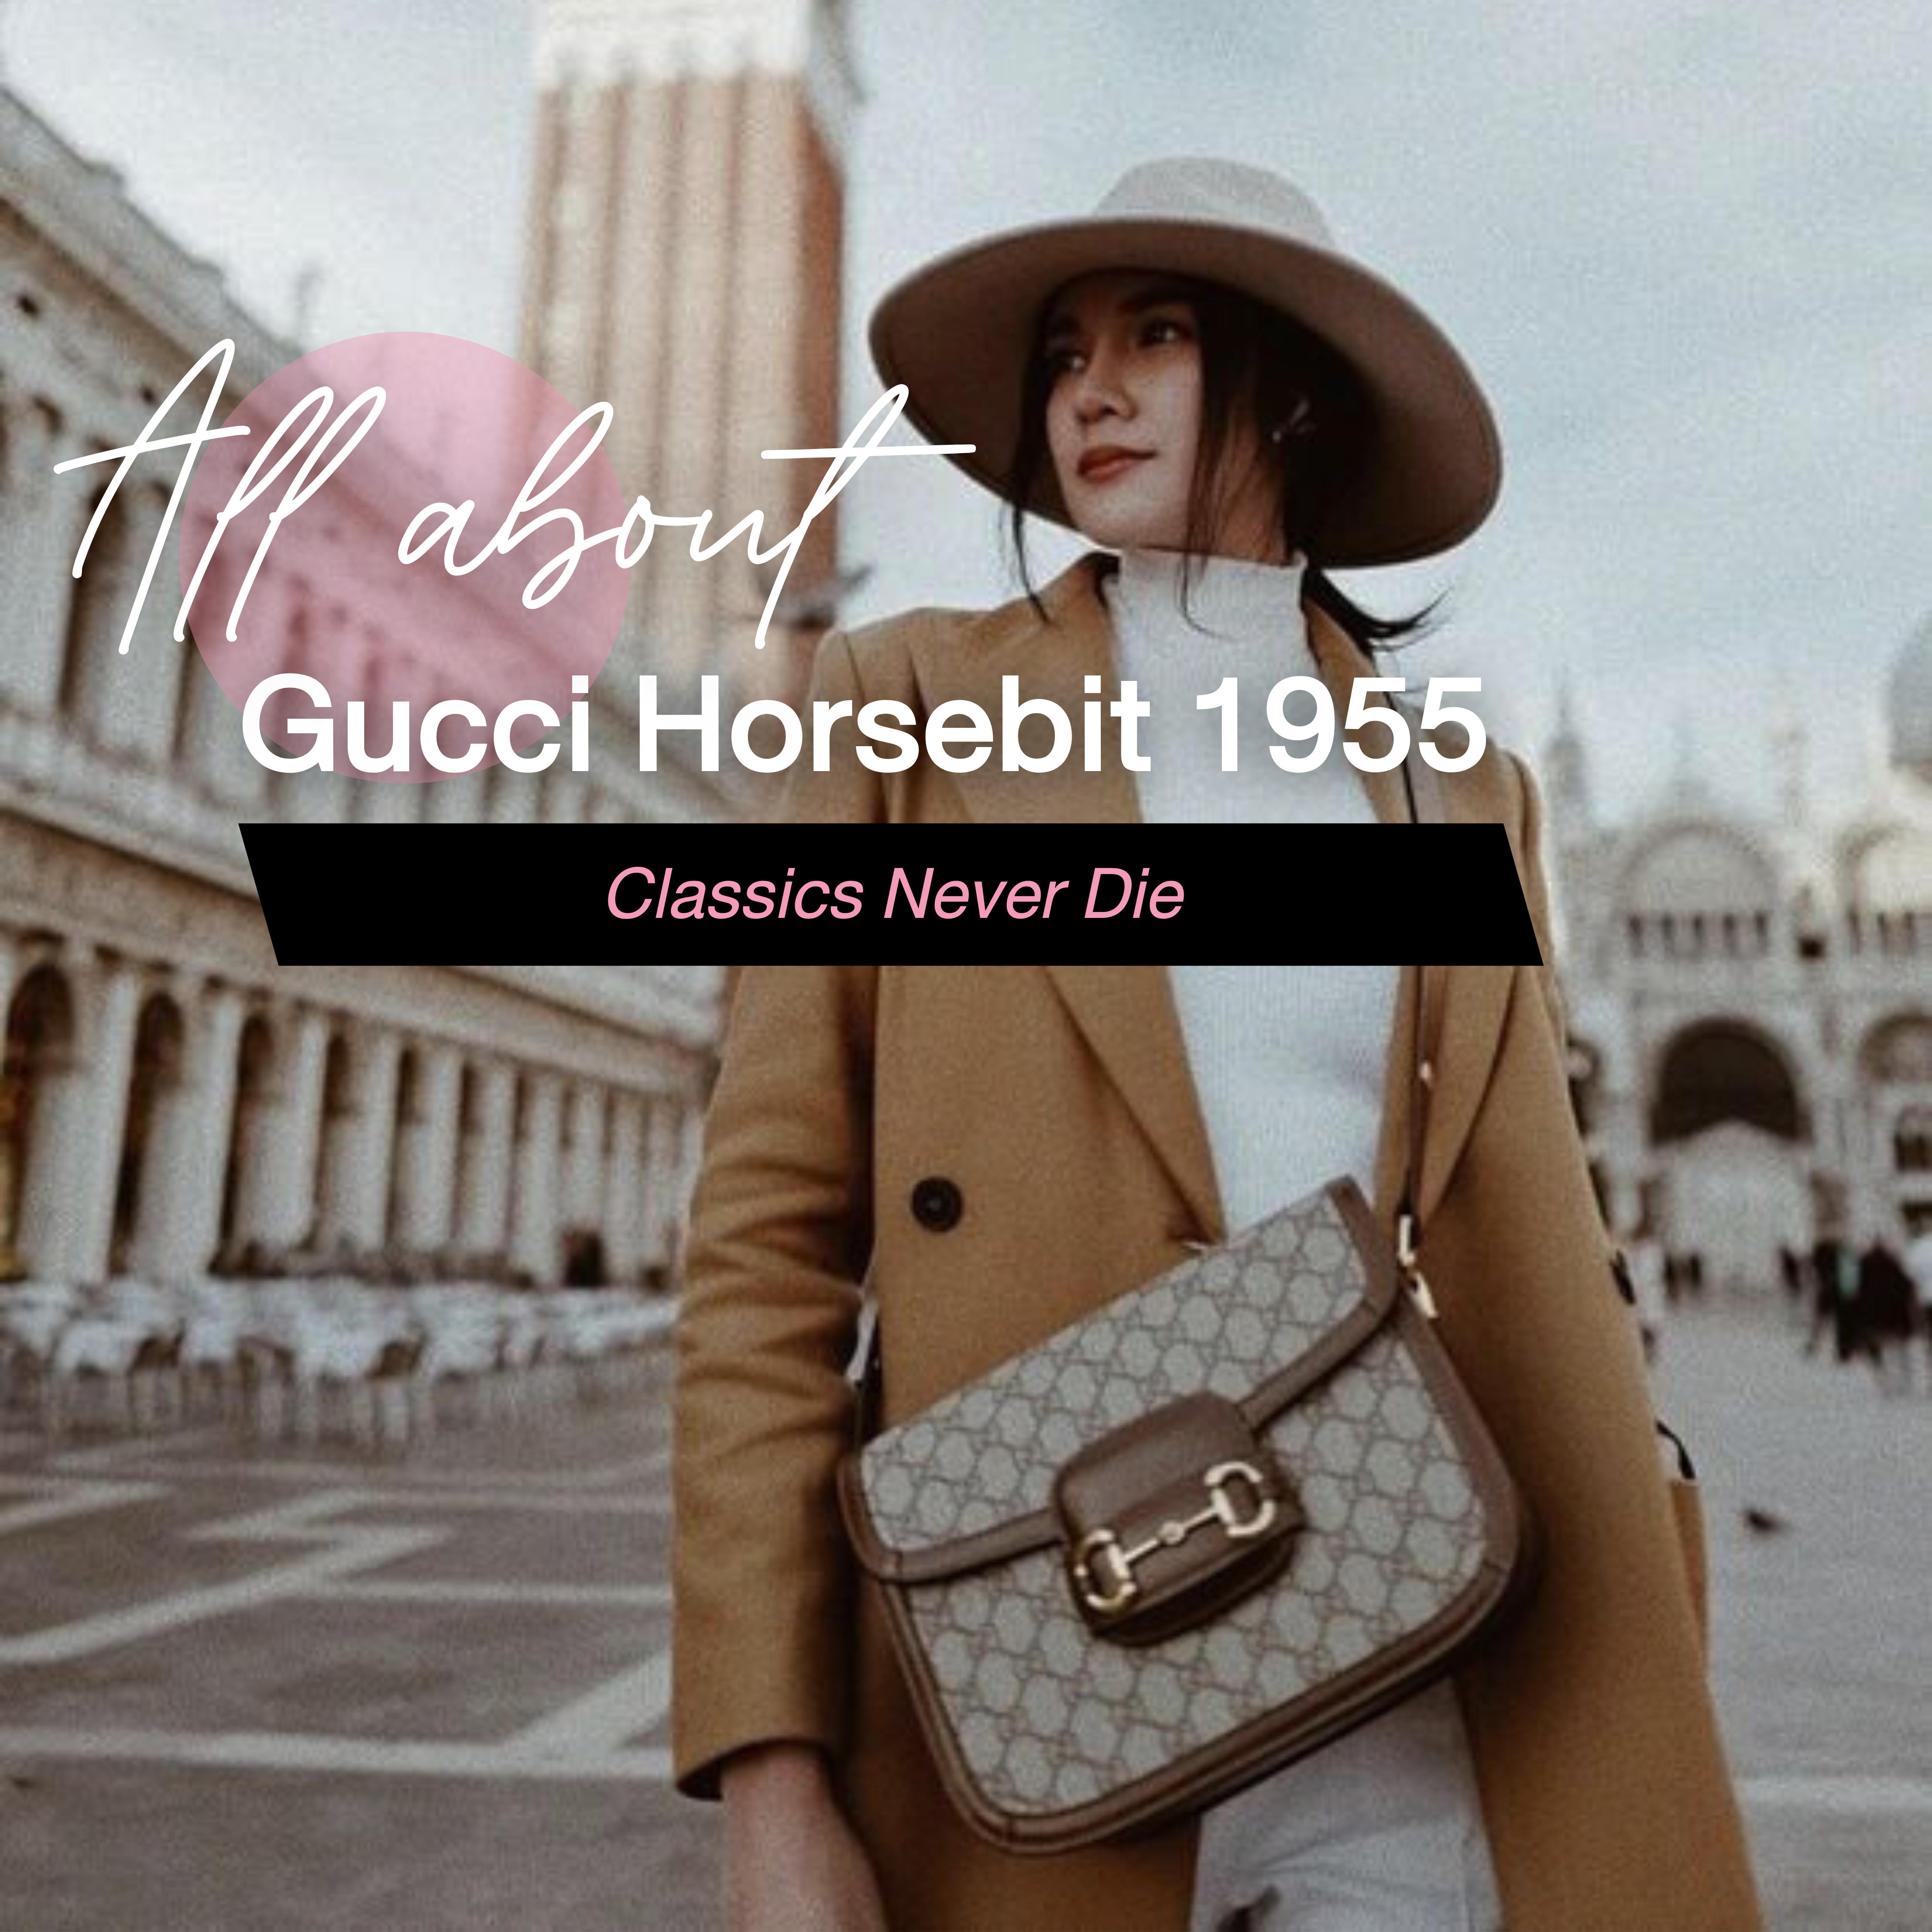 All About Gucci 1955 Horsebit